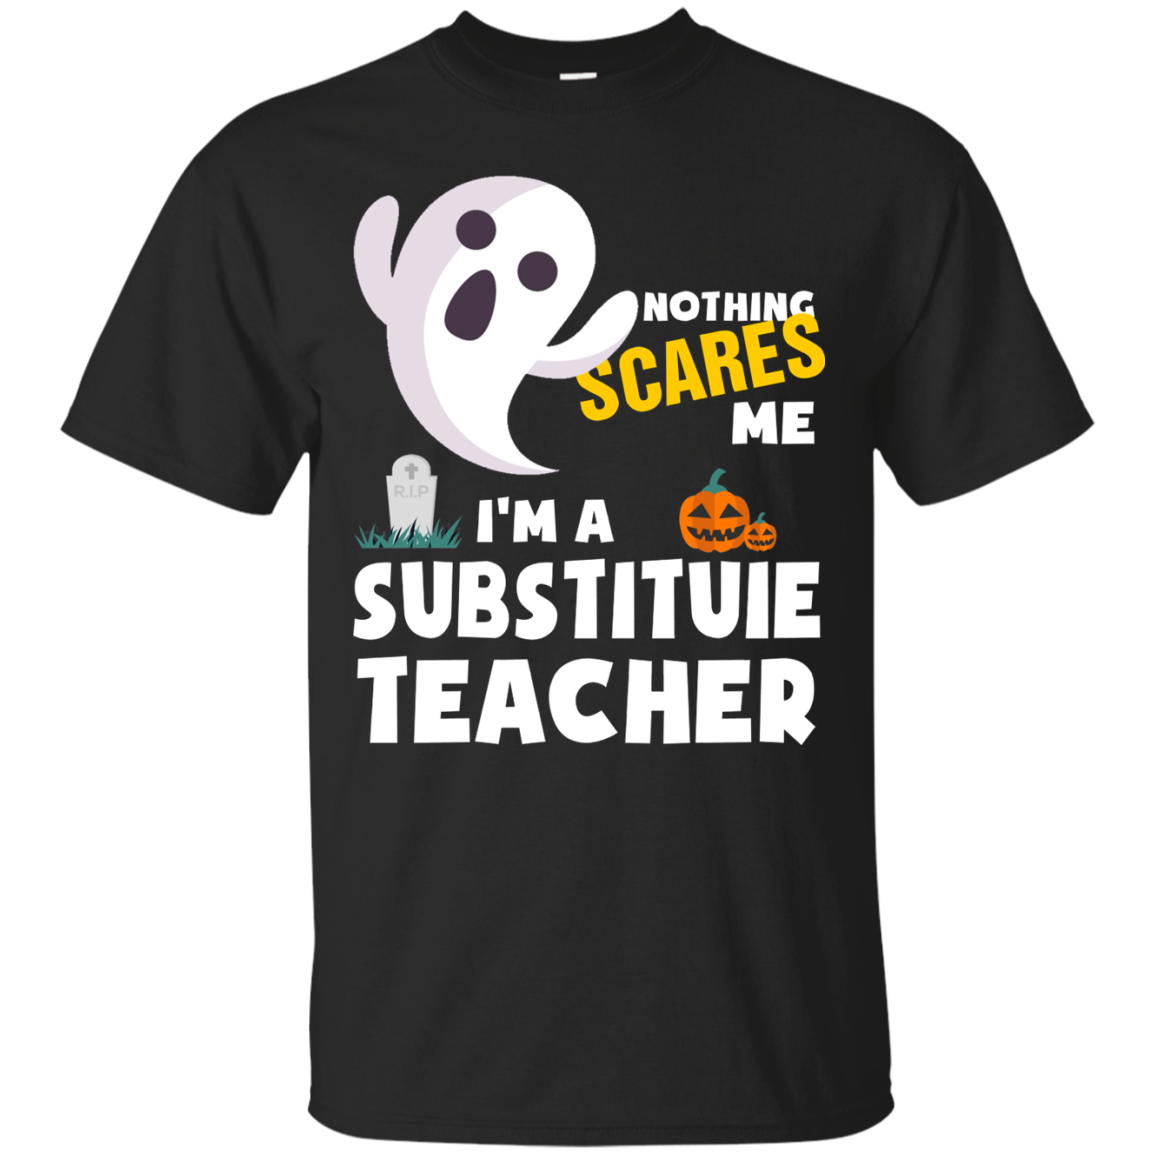 Nothing scares me I'm a Substituie teacher shirt, hoodie, tank